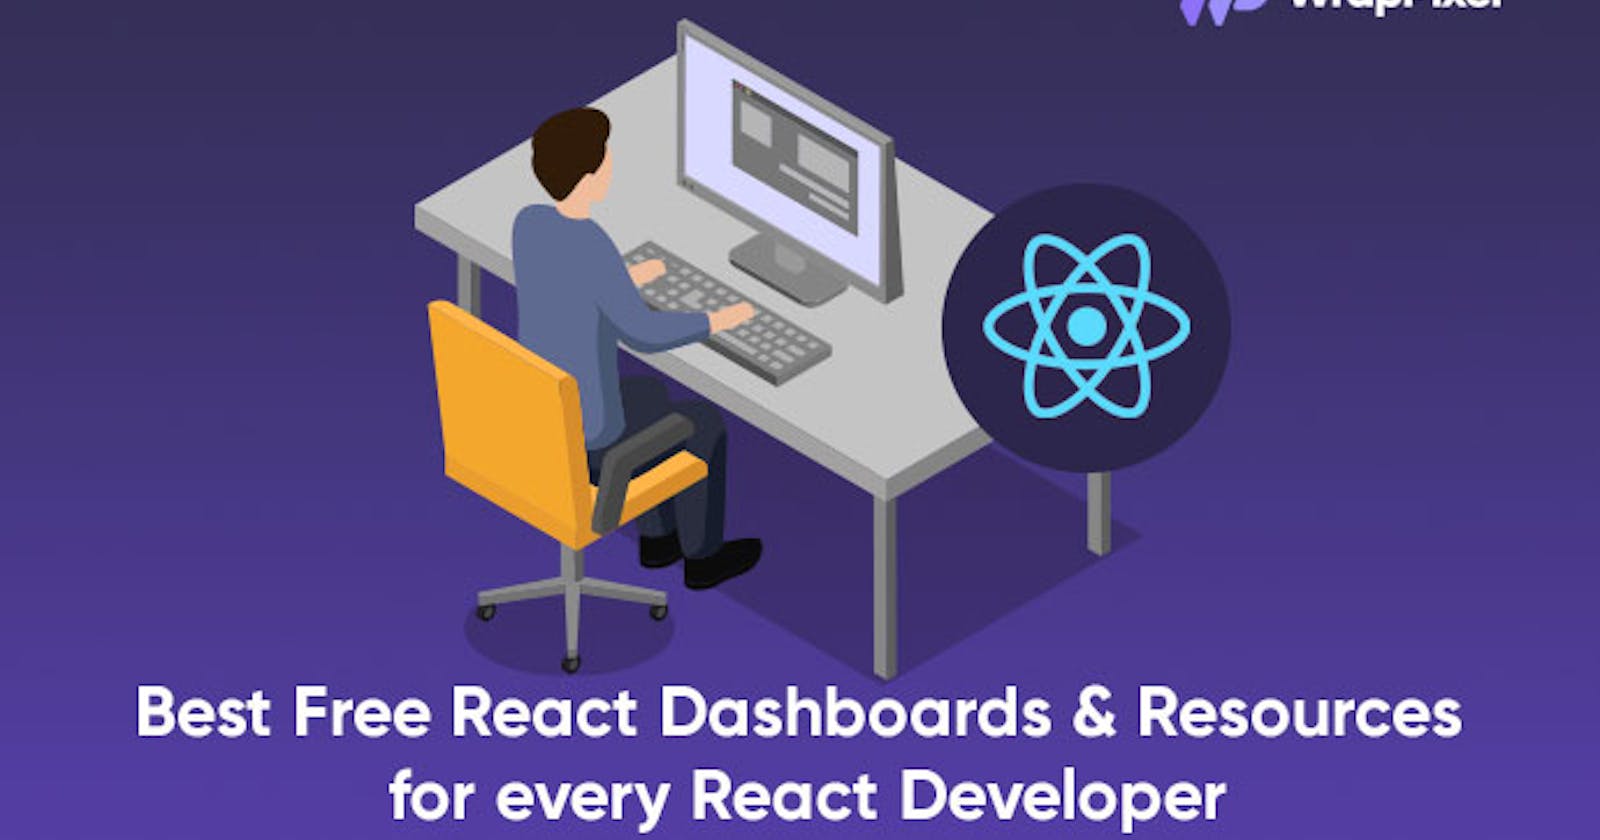 Best Free React Dashboards & Resources for every React Developer